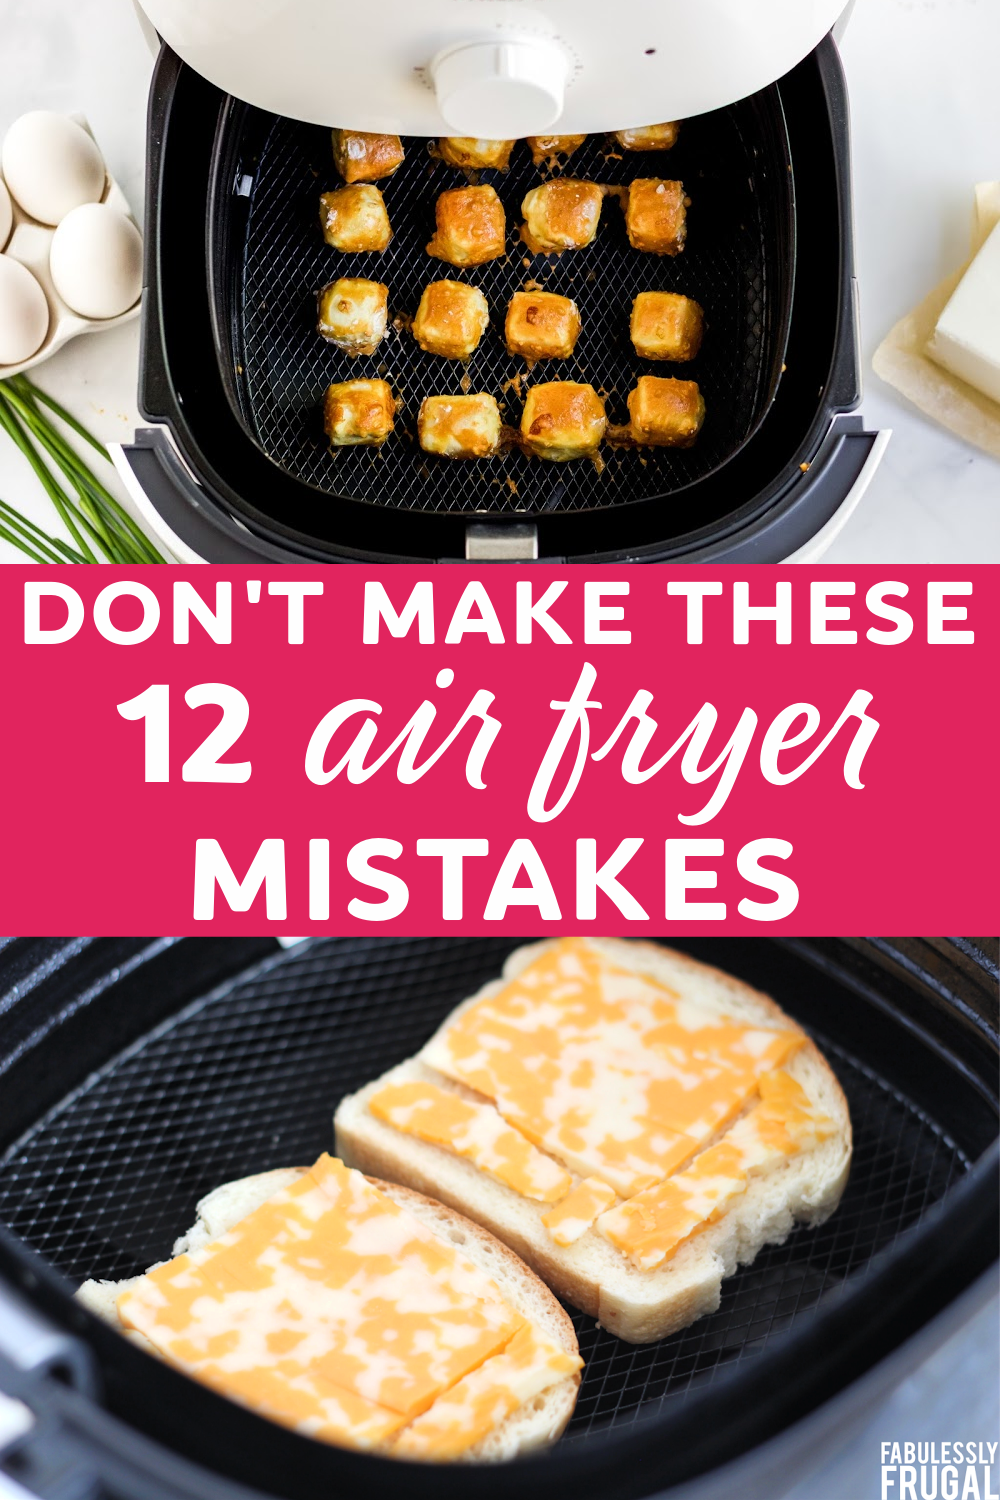 https://fabulesslyfrugal.com/wp-content/uploads/2020/12/dont-make-these-12-air-fryer-mistakes.png